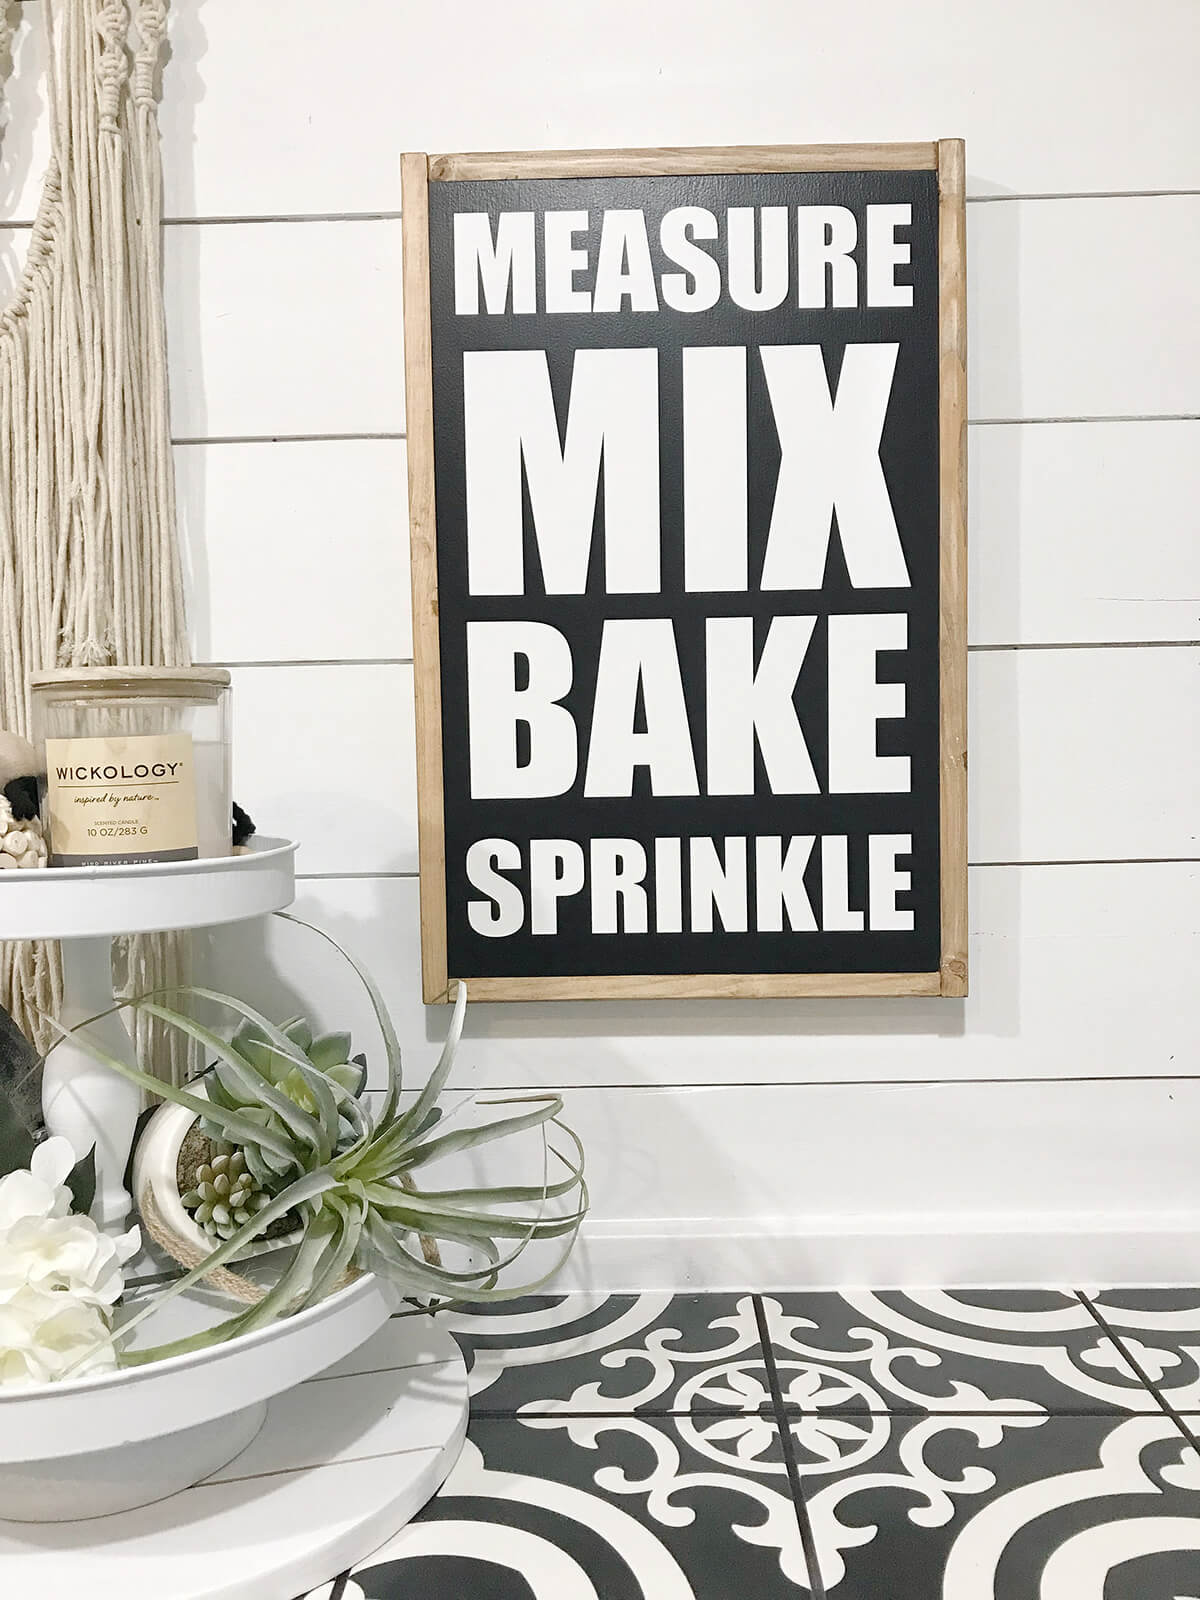 Bold Lettered Kitchen Sign about Baking